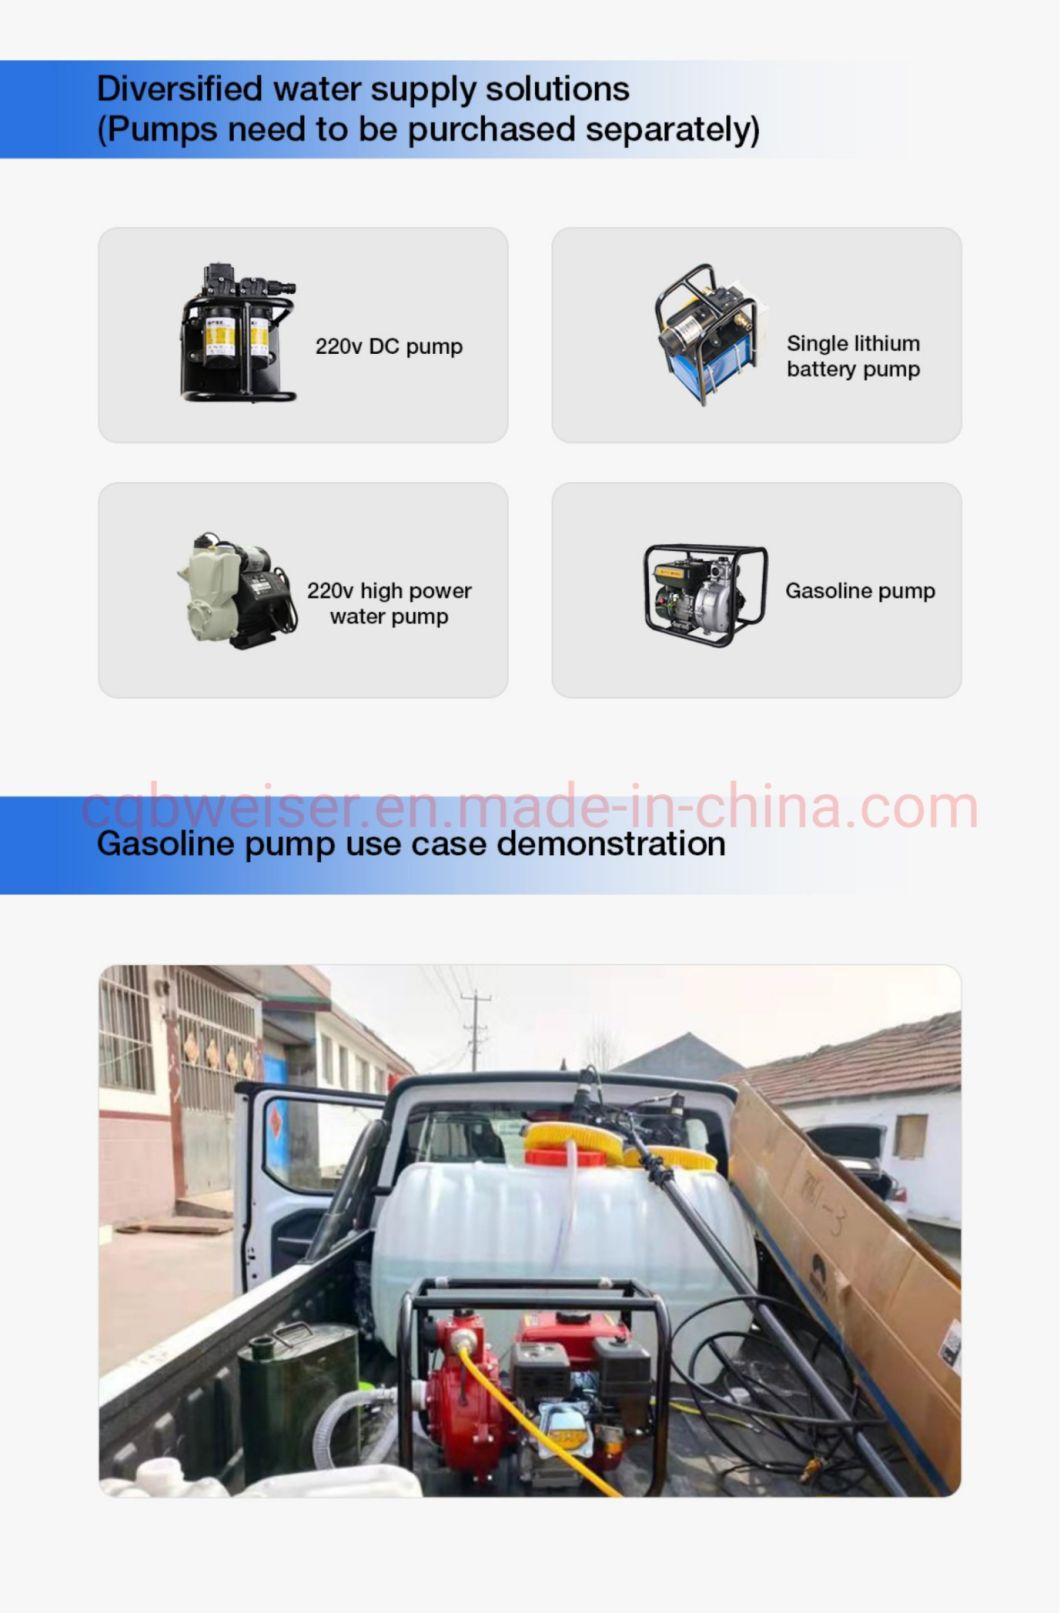 Robot Electric Cleaning Brush Photovoltaic Panel/Advertising Board/Glass Wall/Train, etc.